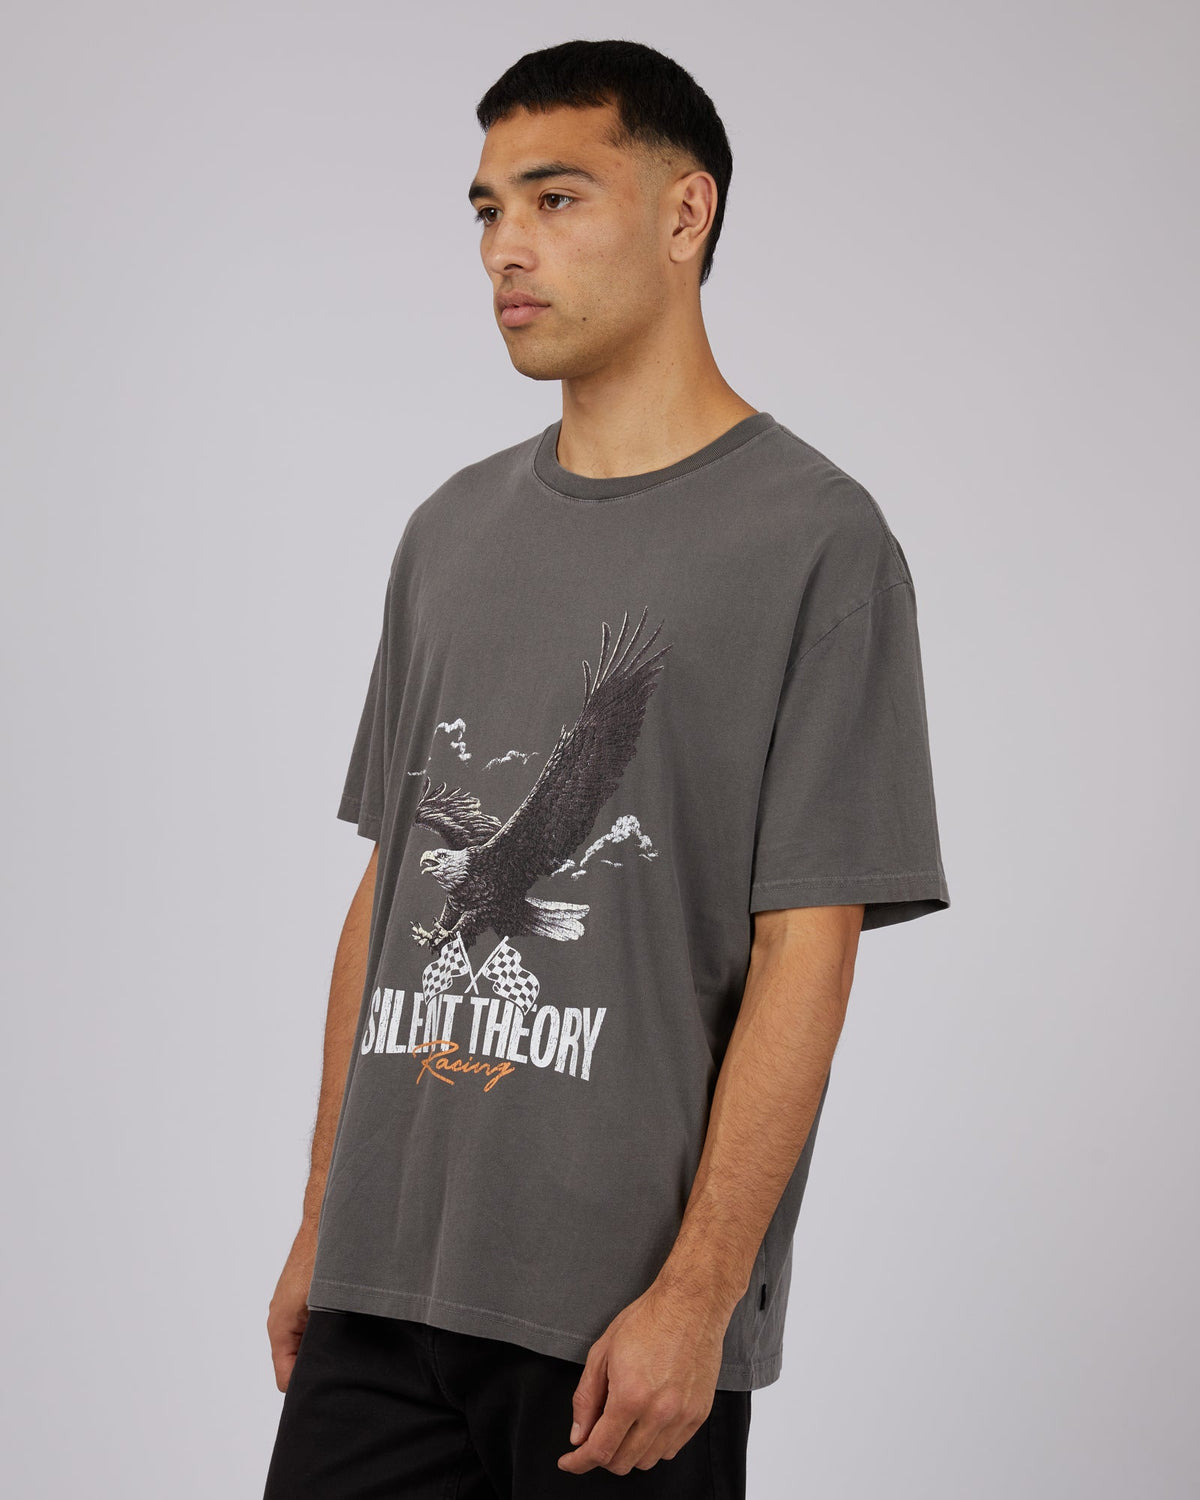 Silent Theory-Pit Stop Tee Coal-Edge Clothing